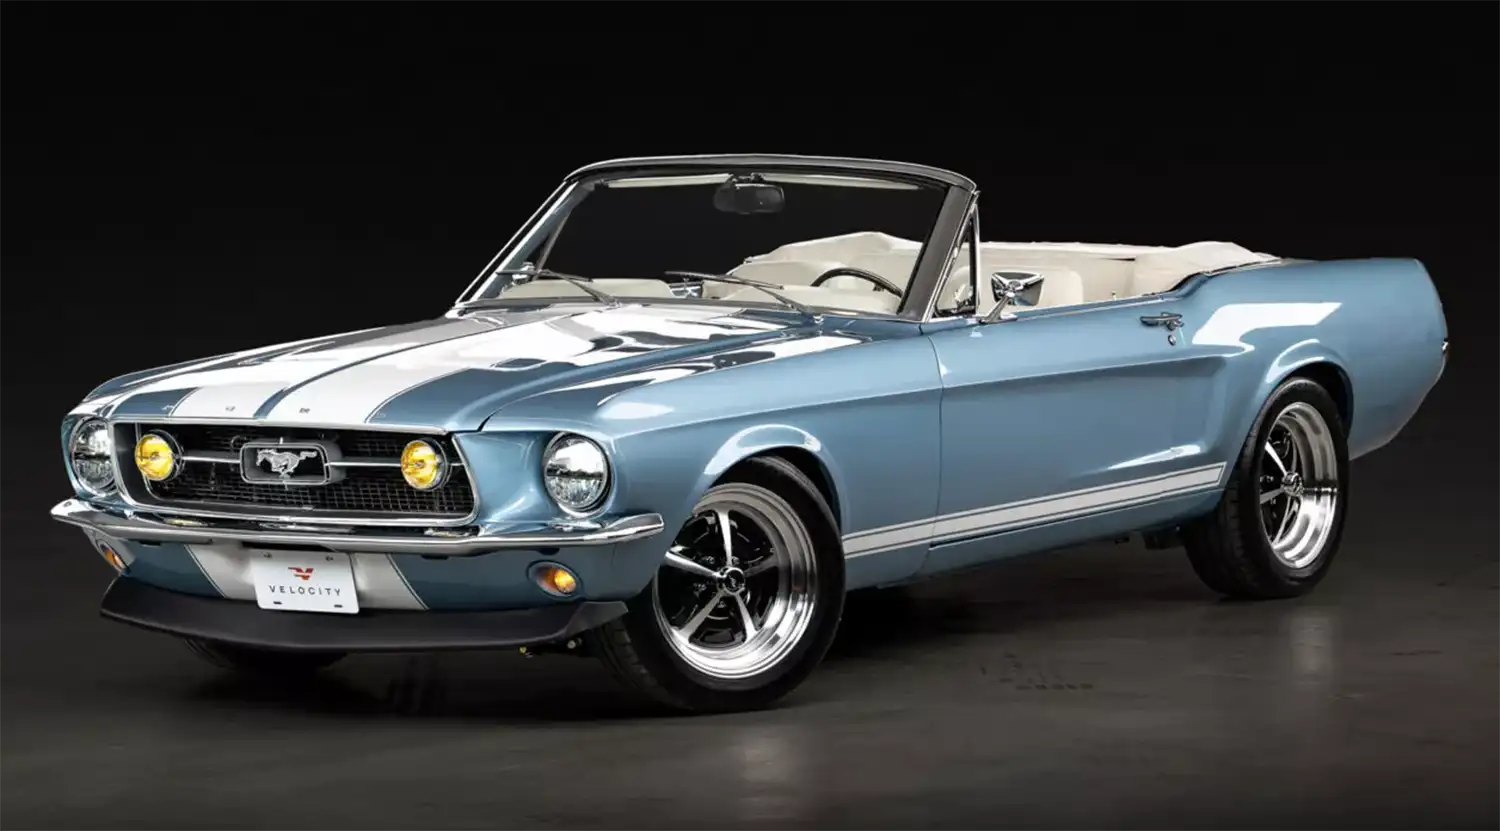 Velocity Restored Ford Mustang Convertible